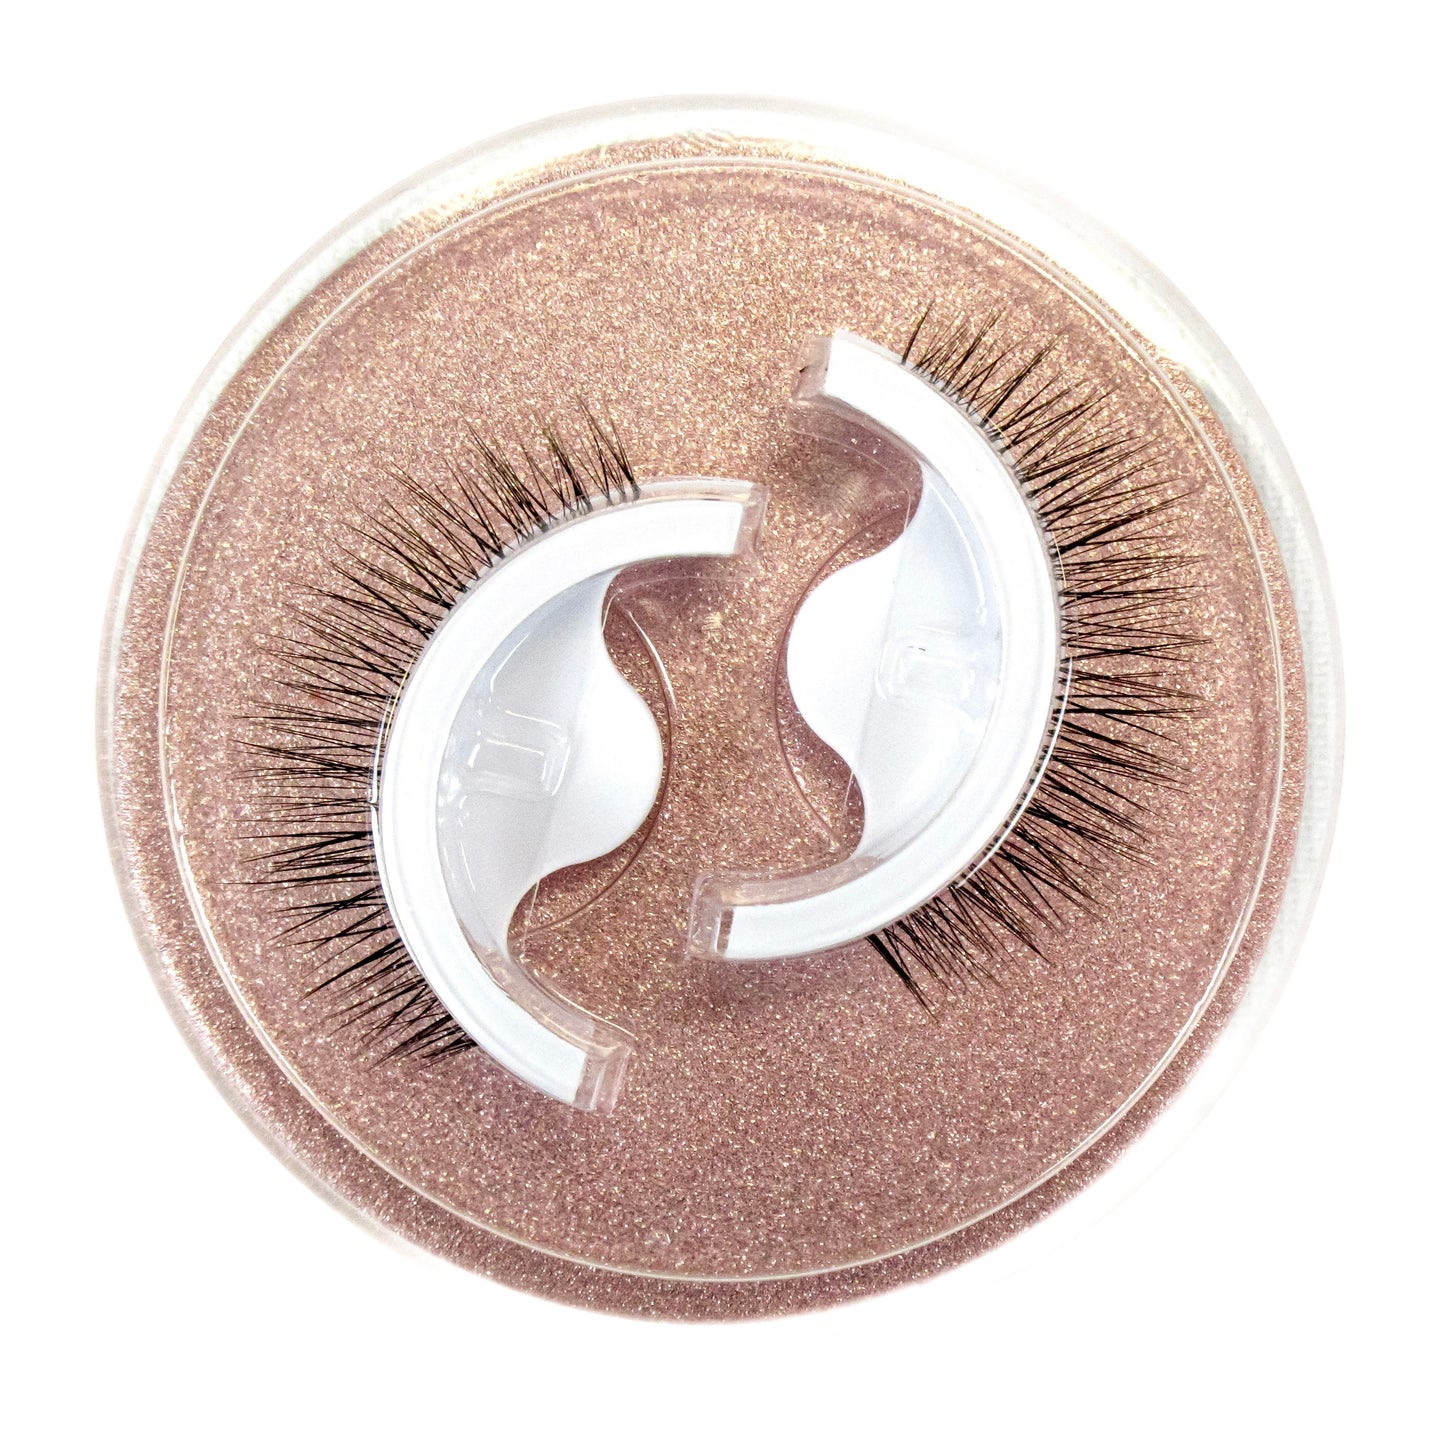 My First Lashes- Caramel (Self-Adhesive)